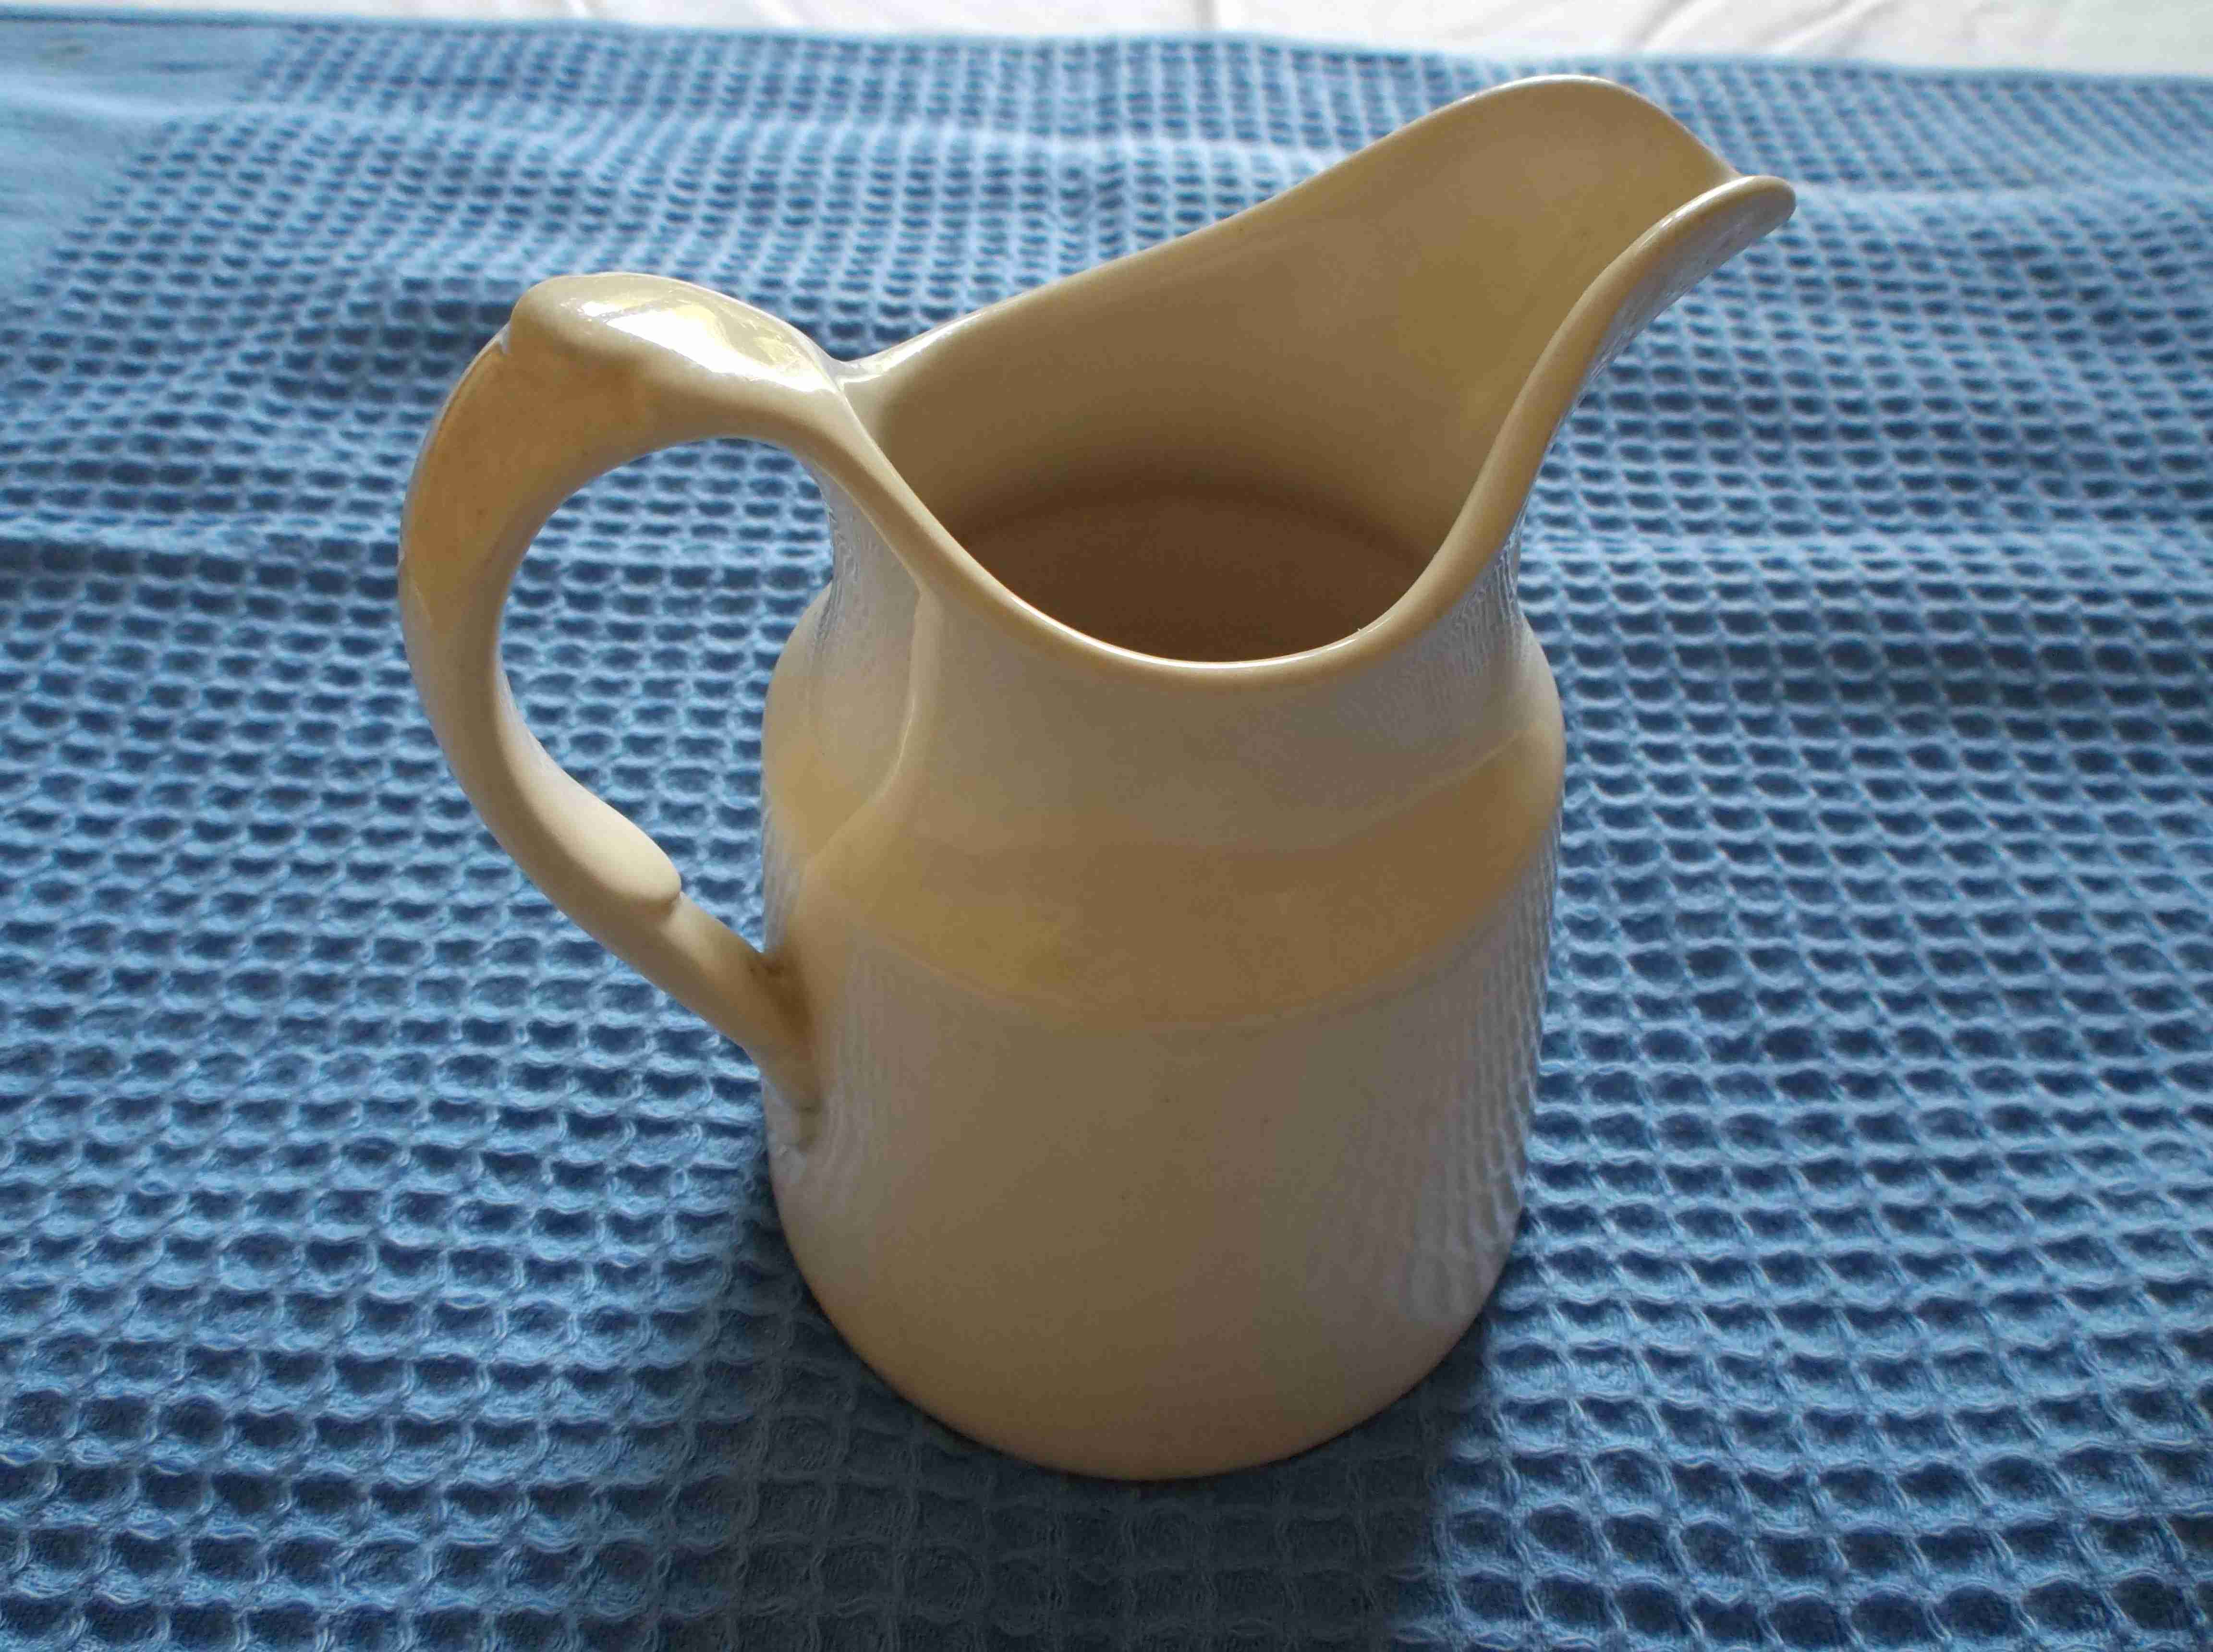 MILK JUG FROM THE UNION CASTLE STEAMSHIP COMPANY